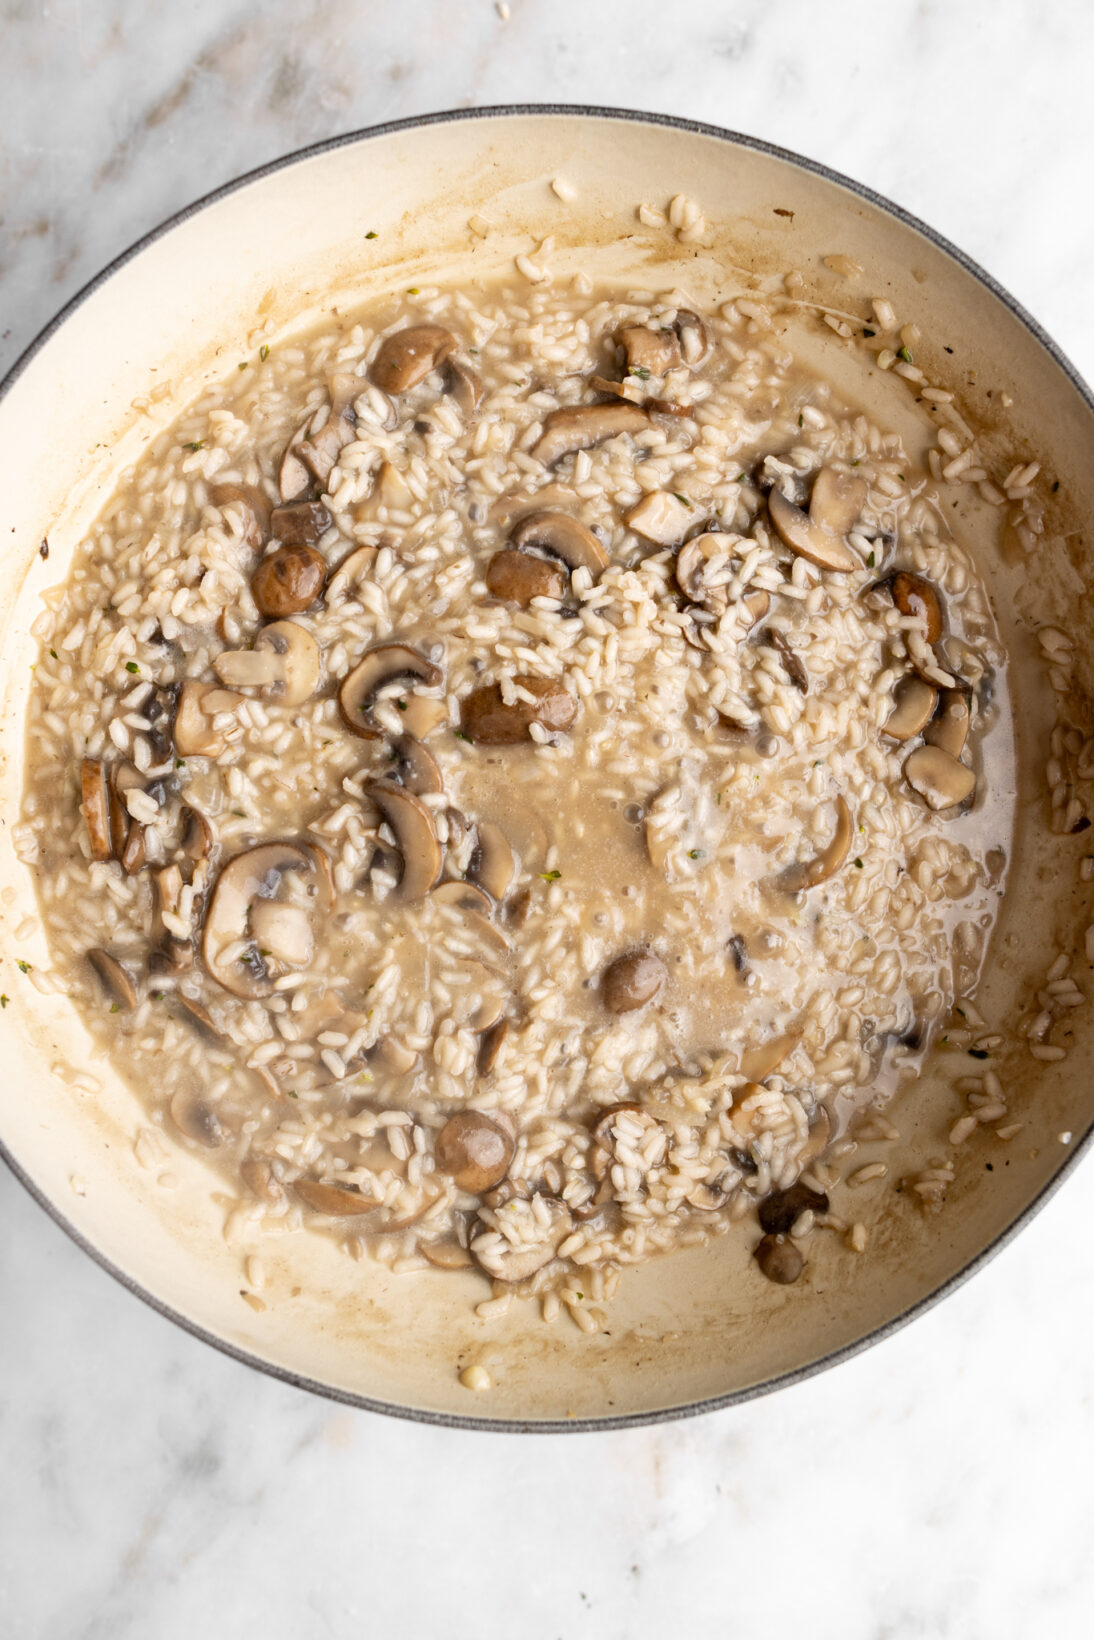 Making mushroom risotto: cooking the risotto